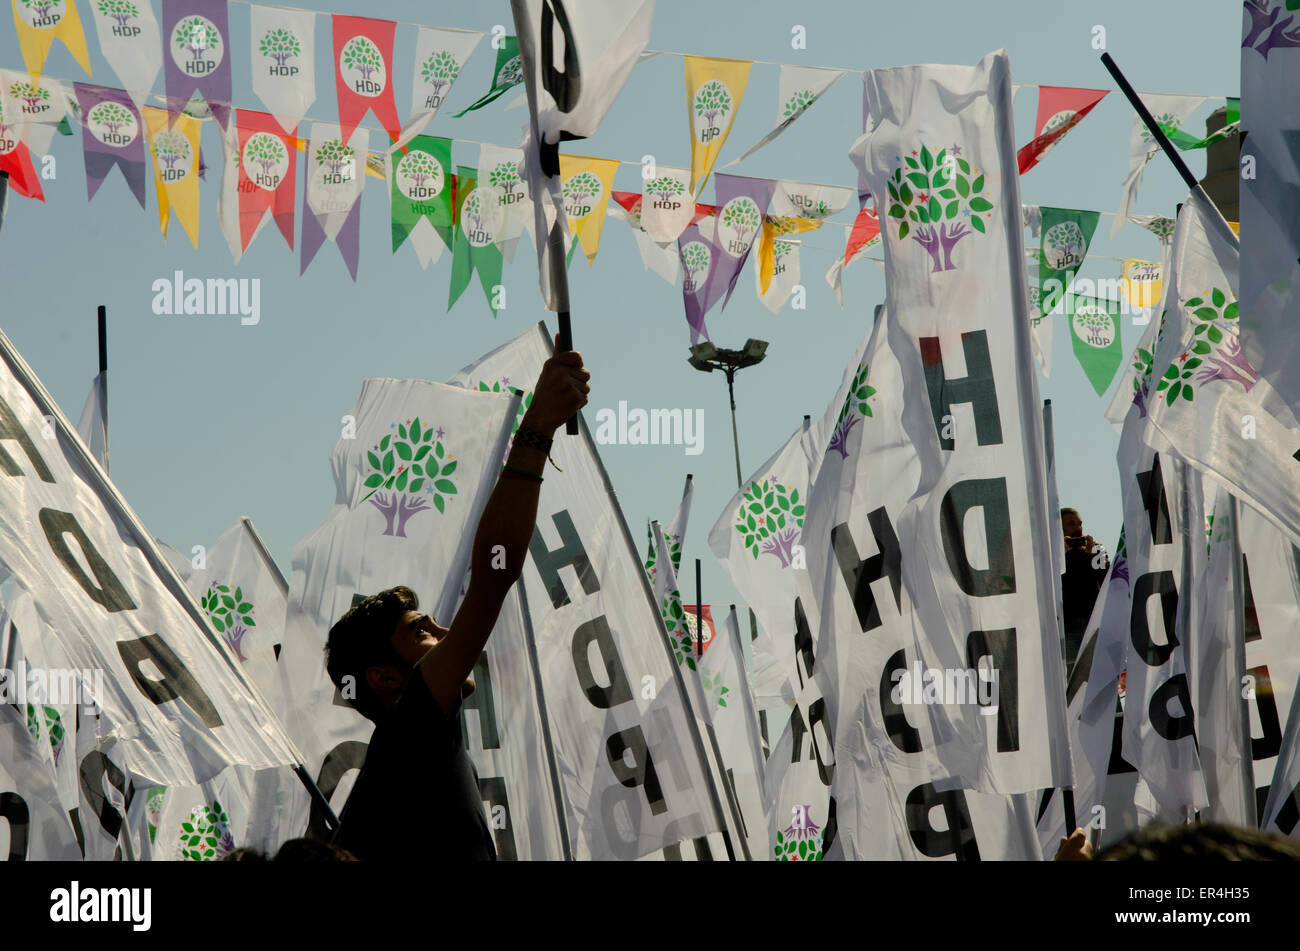 Support for HDP (Peoples' Democratic Party) at Turkish election rally Istanbul Turkey Stock Photo